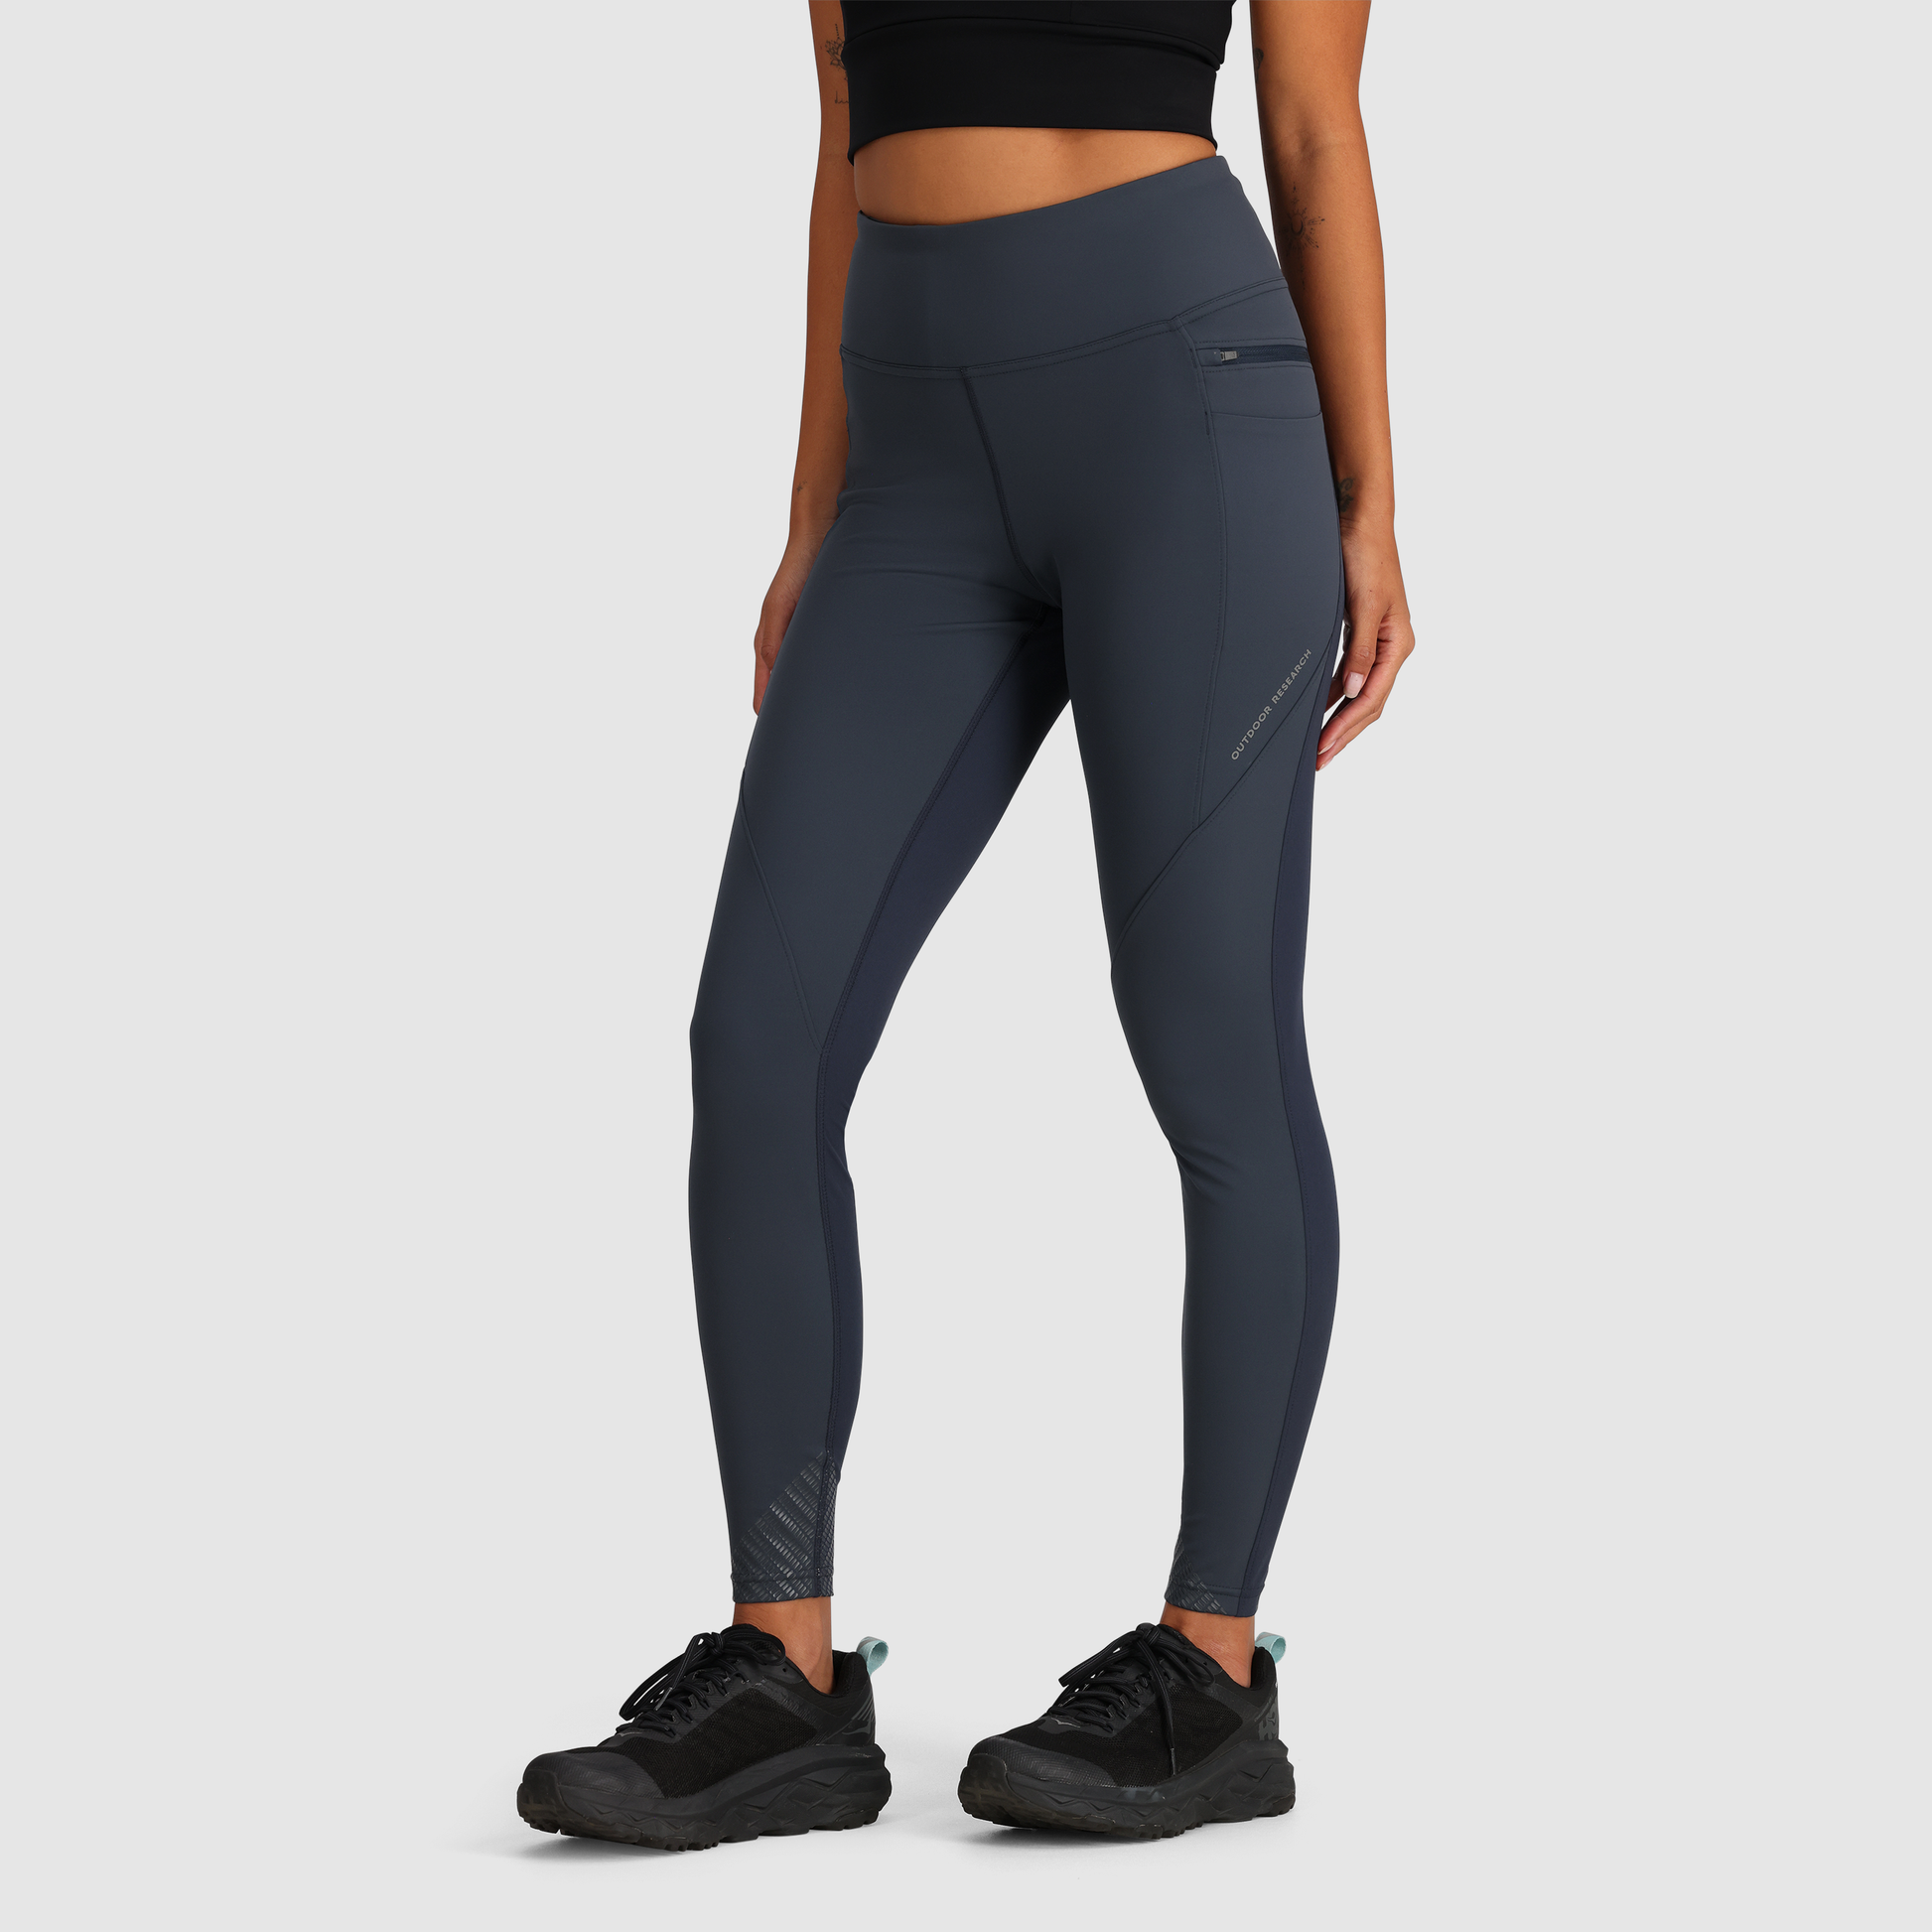 Under Armour Women's UA Perfect Pant - 31.5 Small Short Black